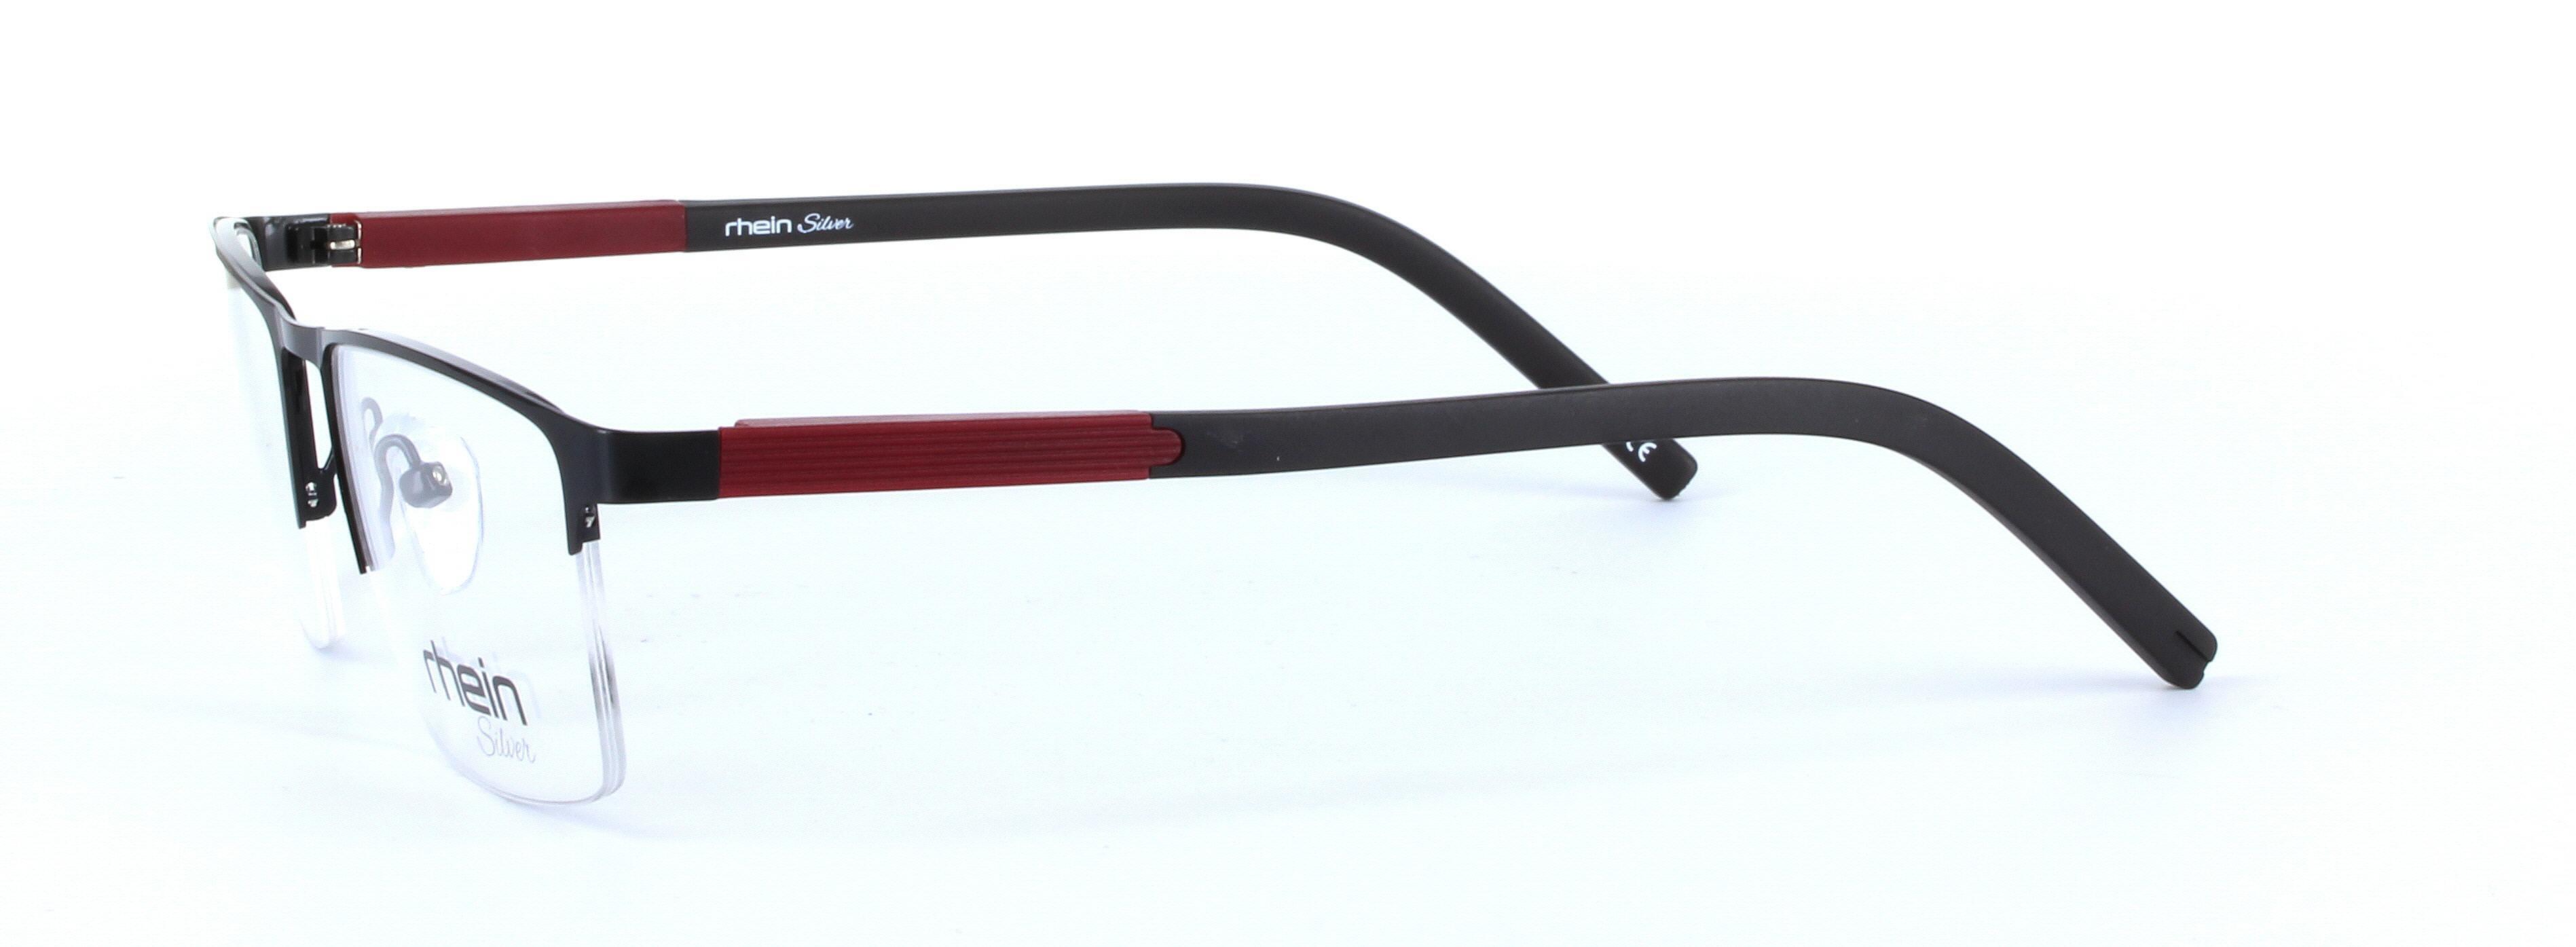 Dell Black and Red Semi Rimless Rectangular Metal Glasses - Image View 2